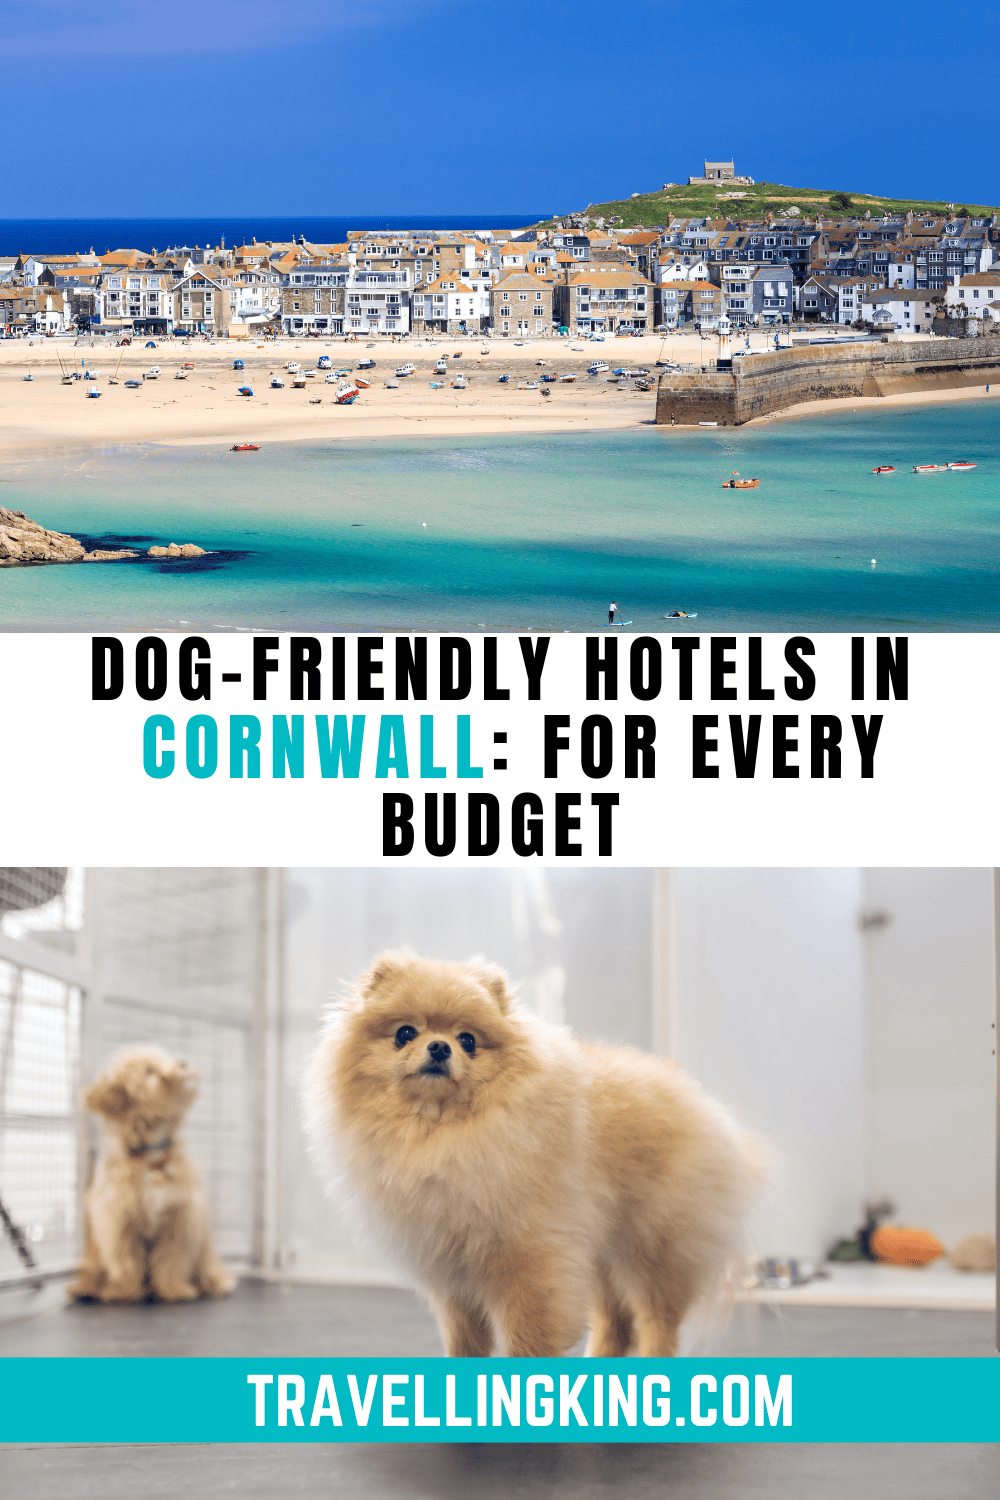 Best Dog-Friendly Hotels in Cornwall: A Guide for Every Budget